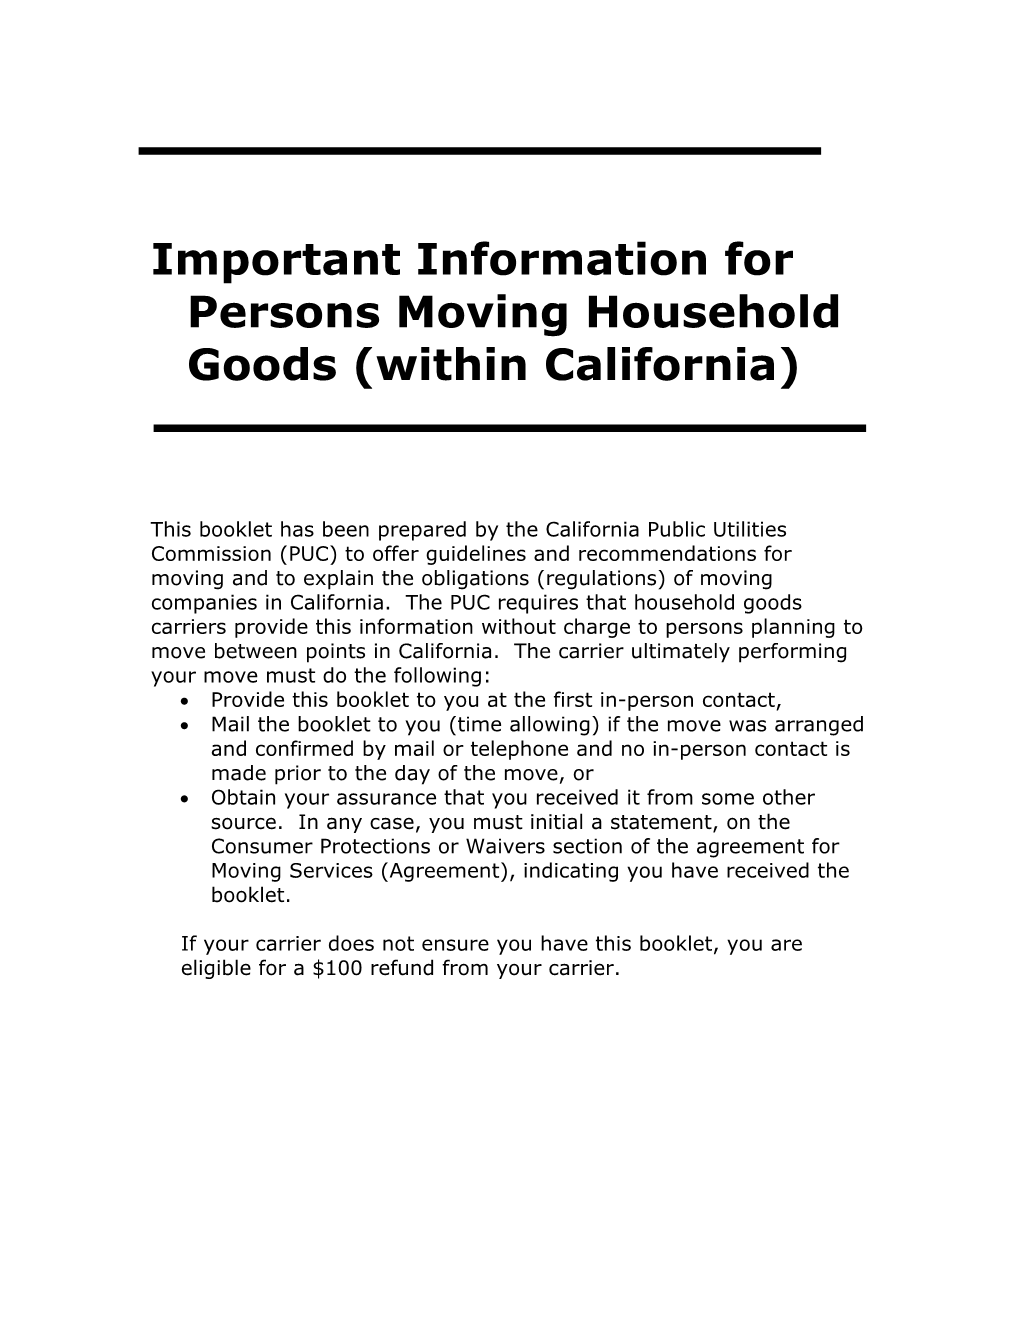 Important Information for Persons Moving Household Goods (Within California)